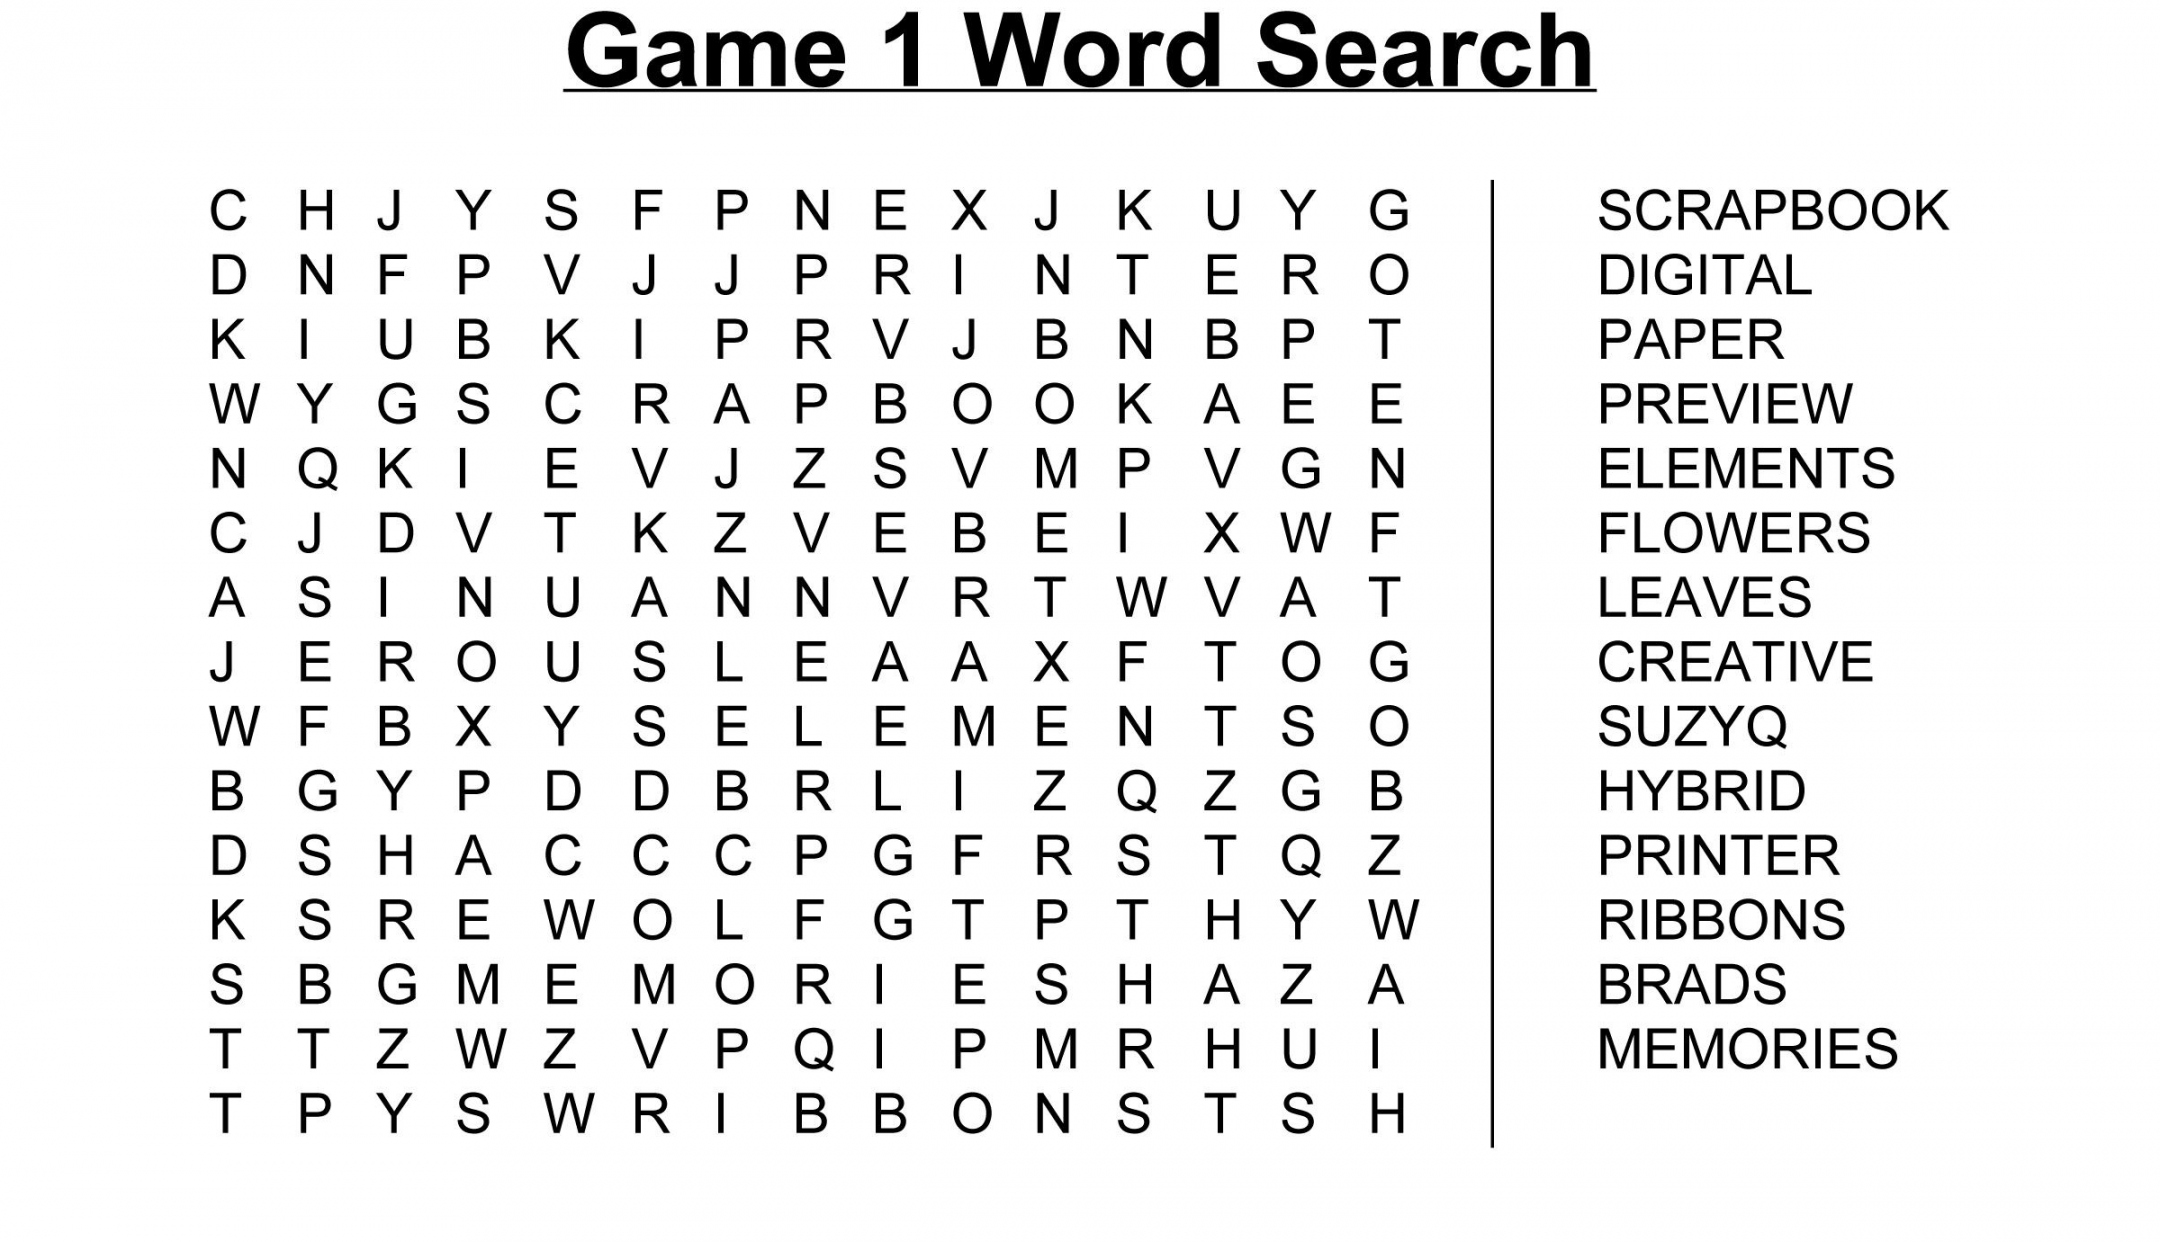 Large Print Word Search Printable Free - Printable - Printable Word Searches Games  Word find, Word search puzzles